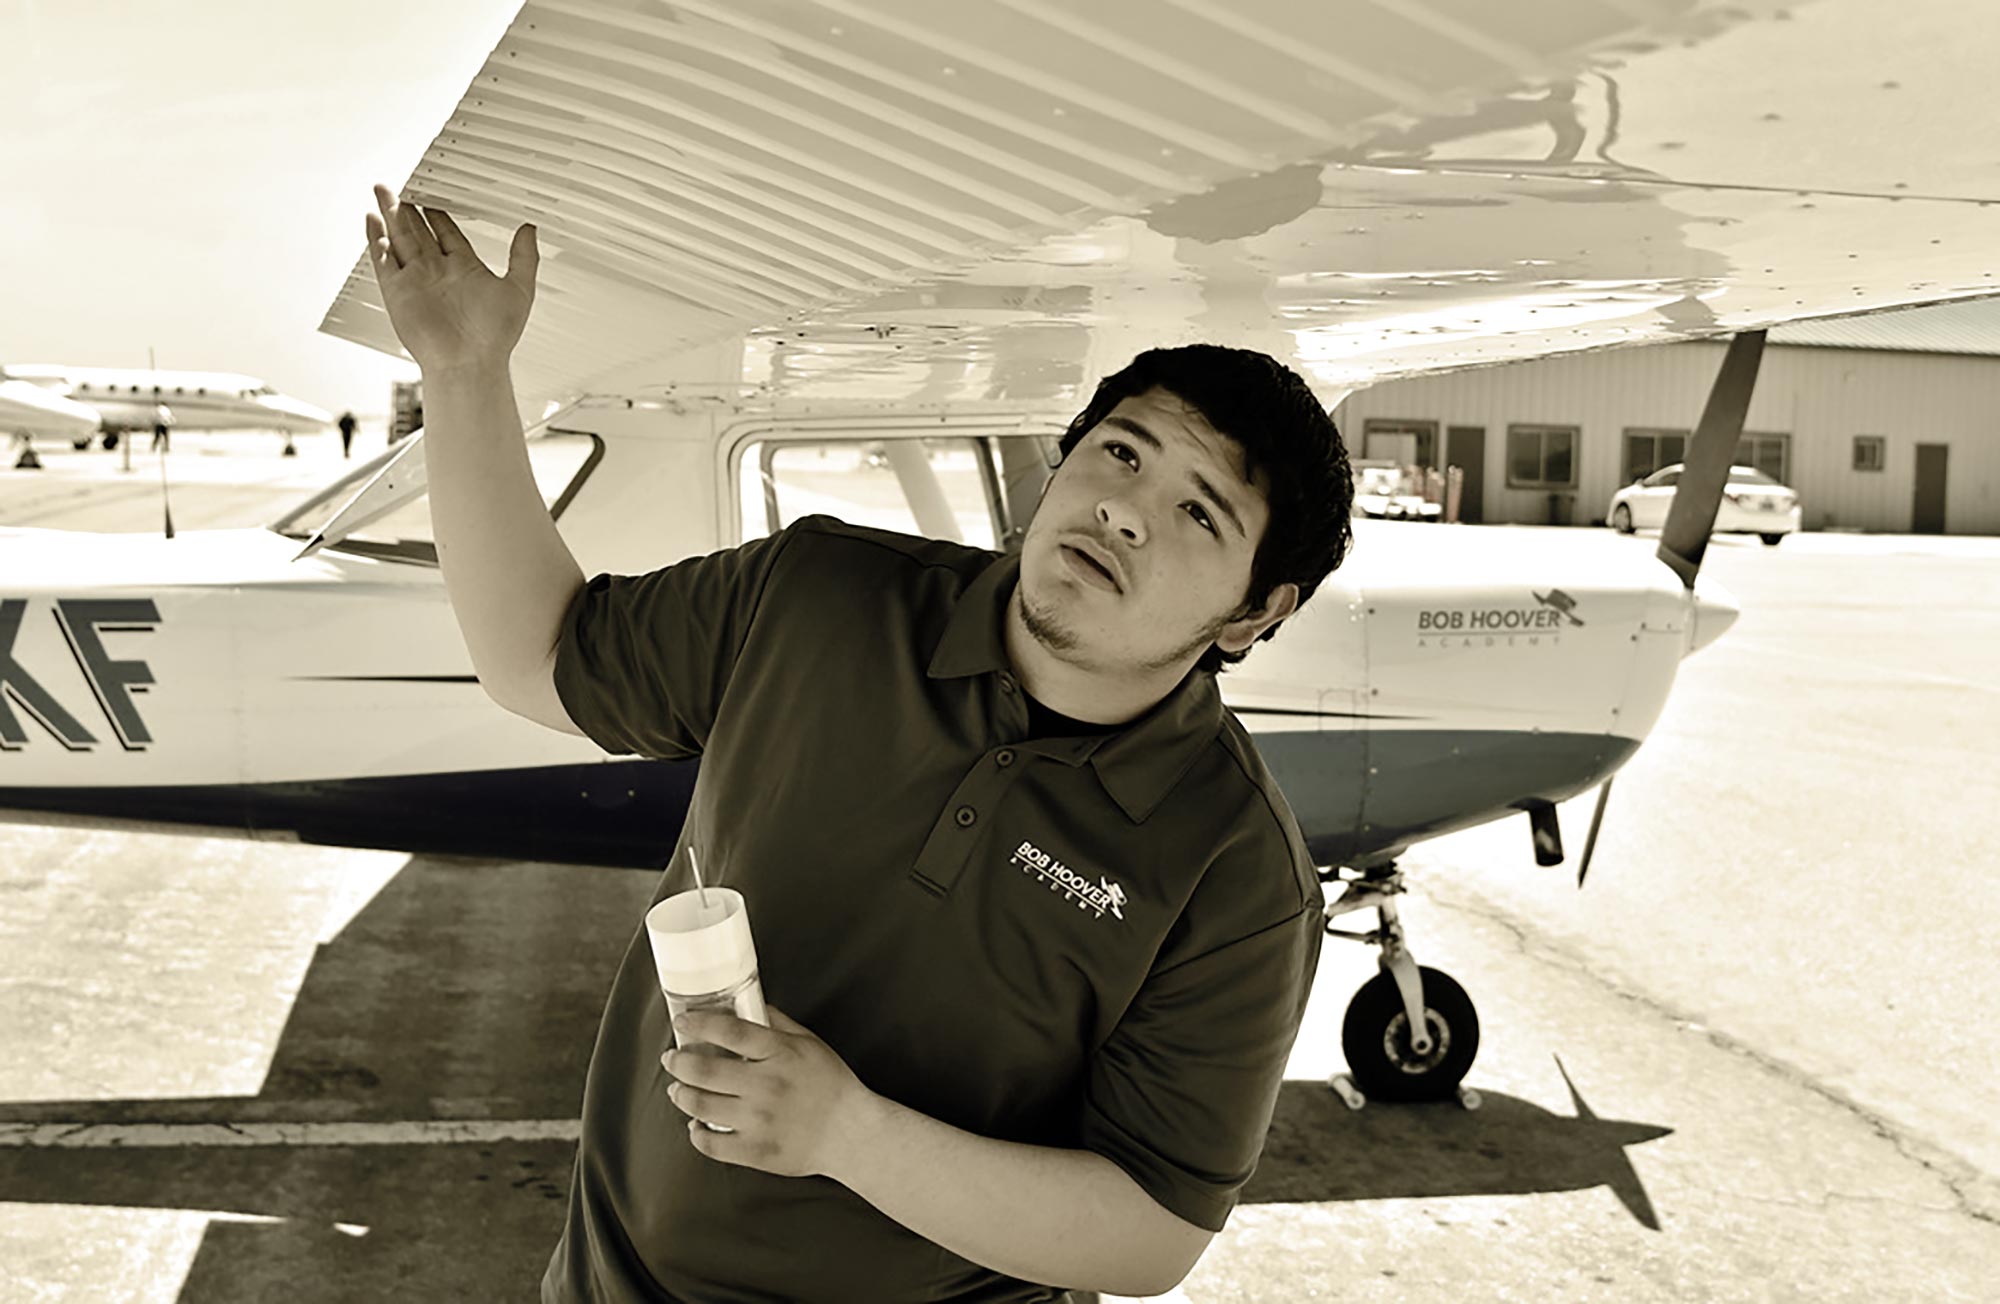 a male student wearing a Bob Hoover Academy embroidered polo shirt examines the wing of a small plane parked on a tarmac